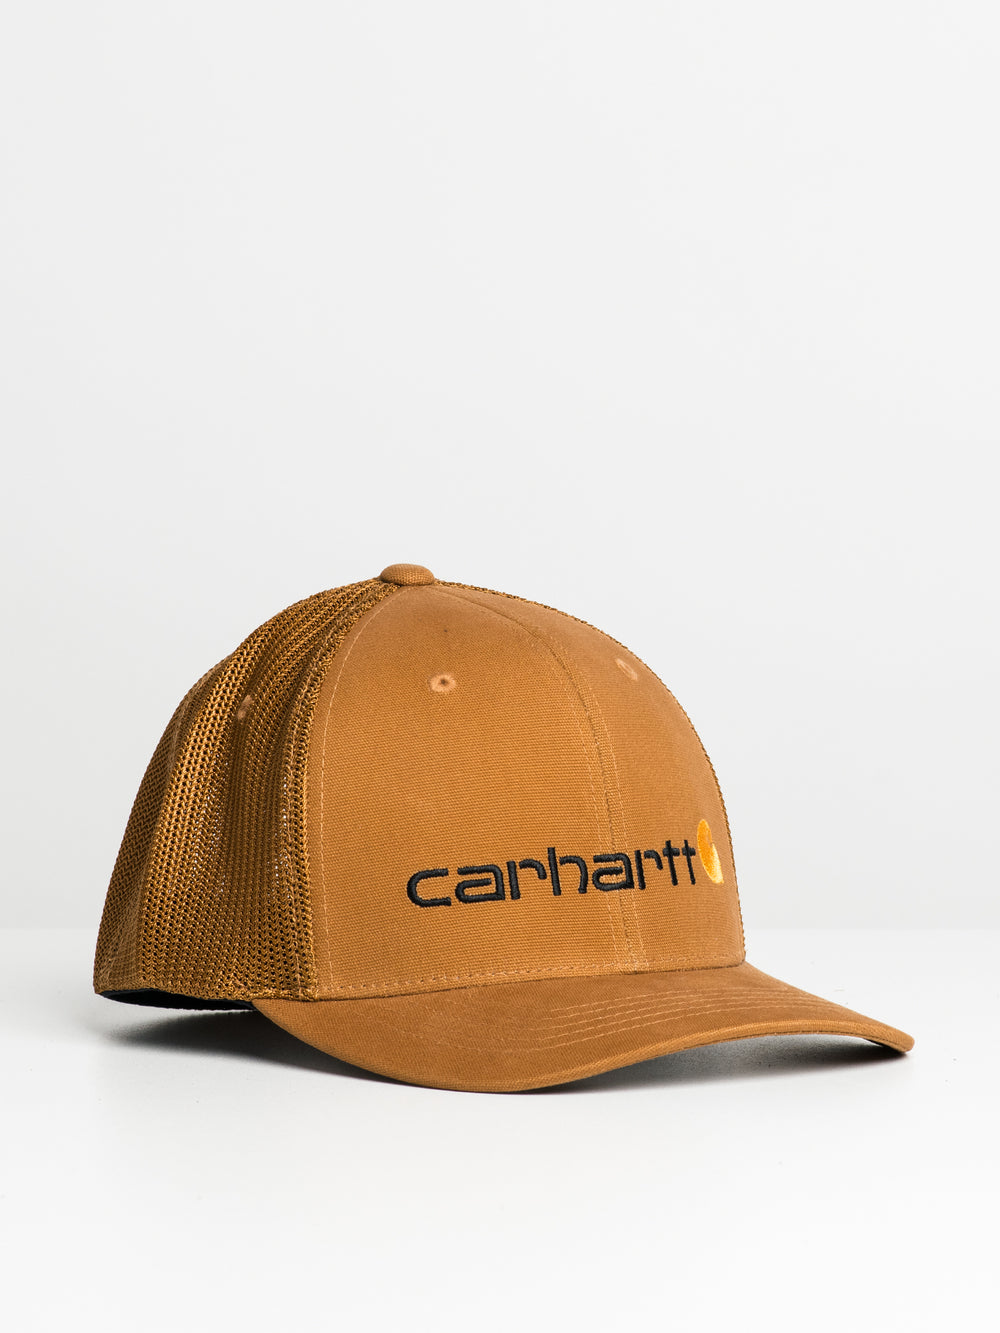 CARHARTT CANVAS MESHBACK HAT - BROWN - CLEARANCE